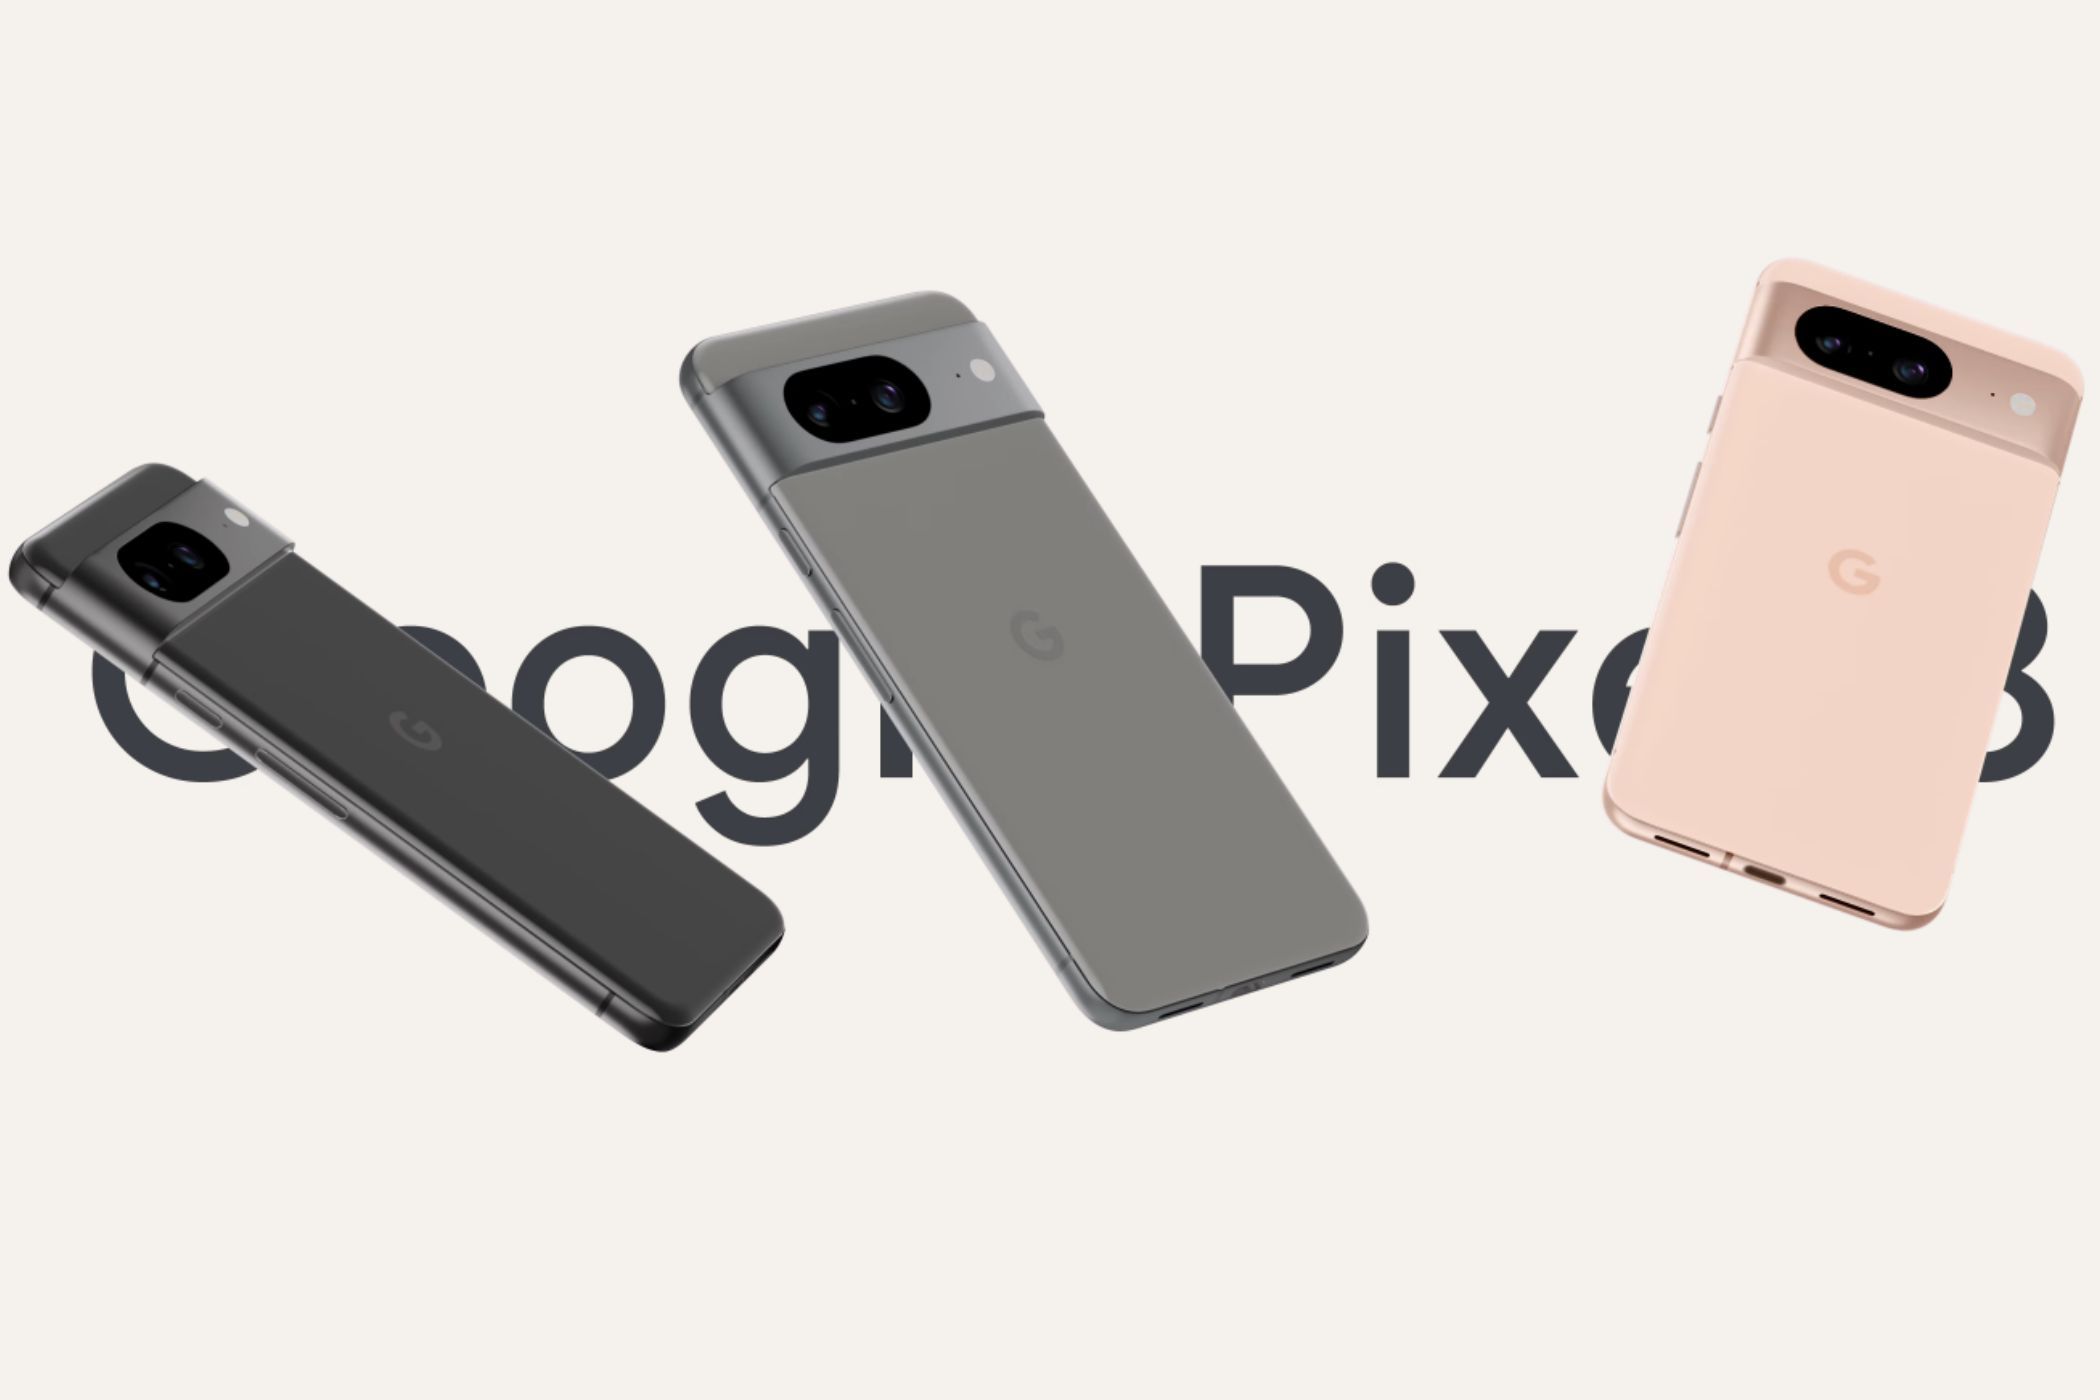 An image showing all the official colors of the Google Pixel 8 colors with the phone's branding in the background.